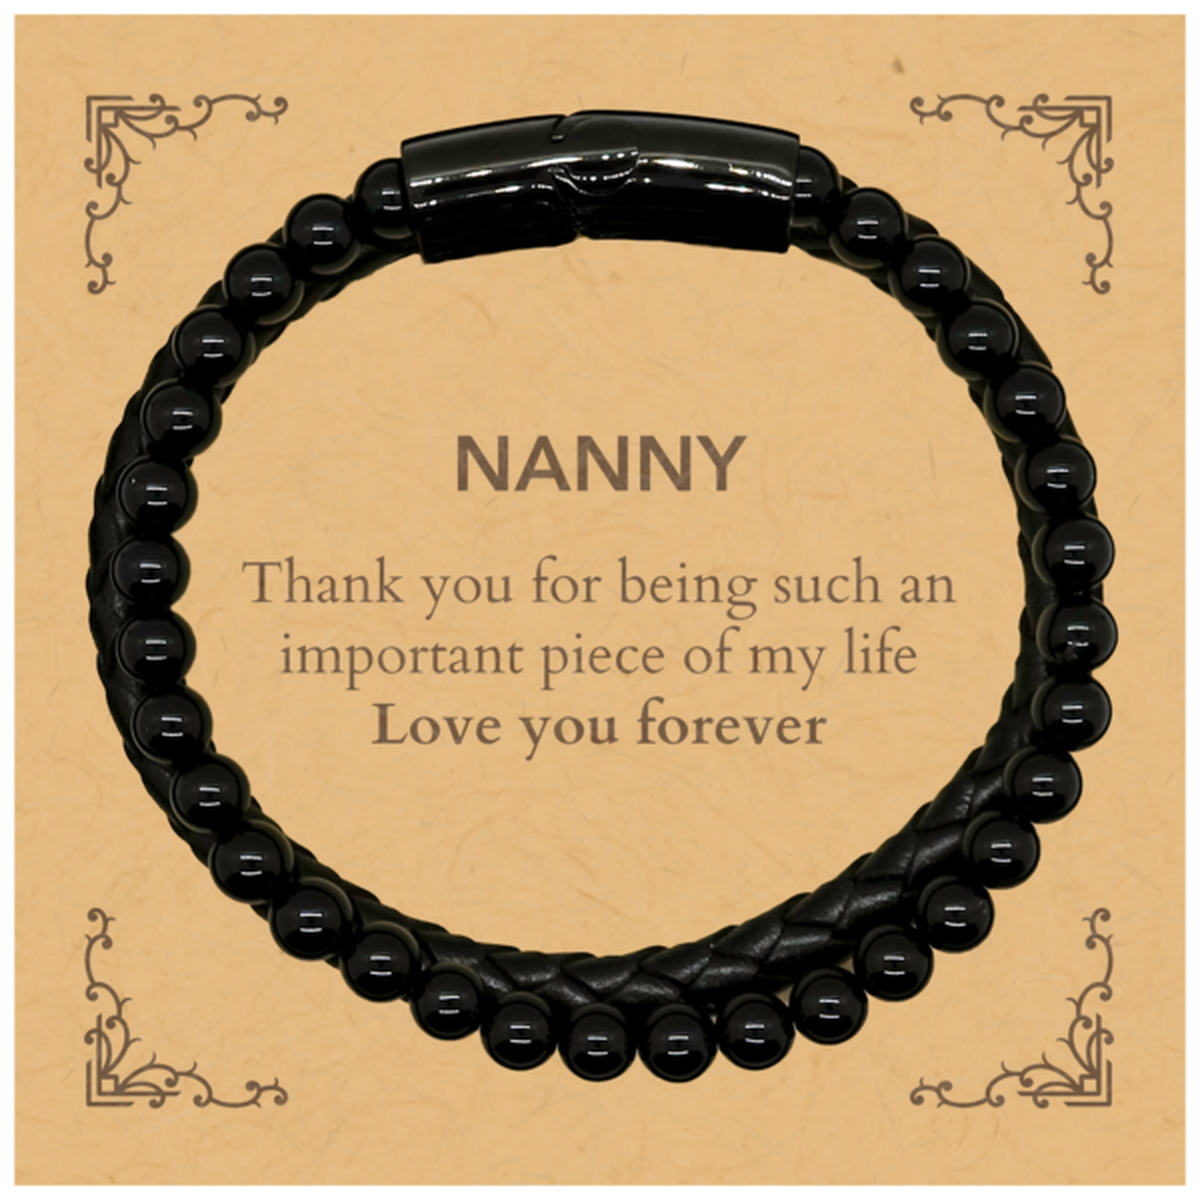 Appropriate Nanny Stone Leather Bracelets Epic Birthday Gifts for Nanny Thank you for being such an important piece of my life Nanny Christmas Mothers Fathers Day